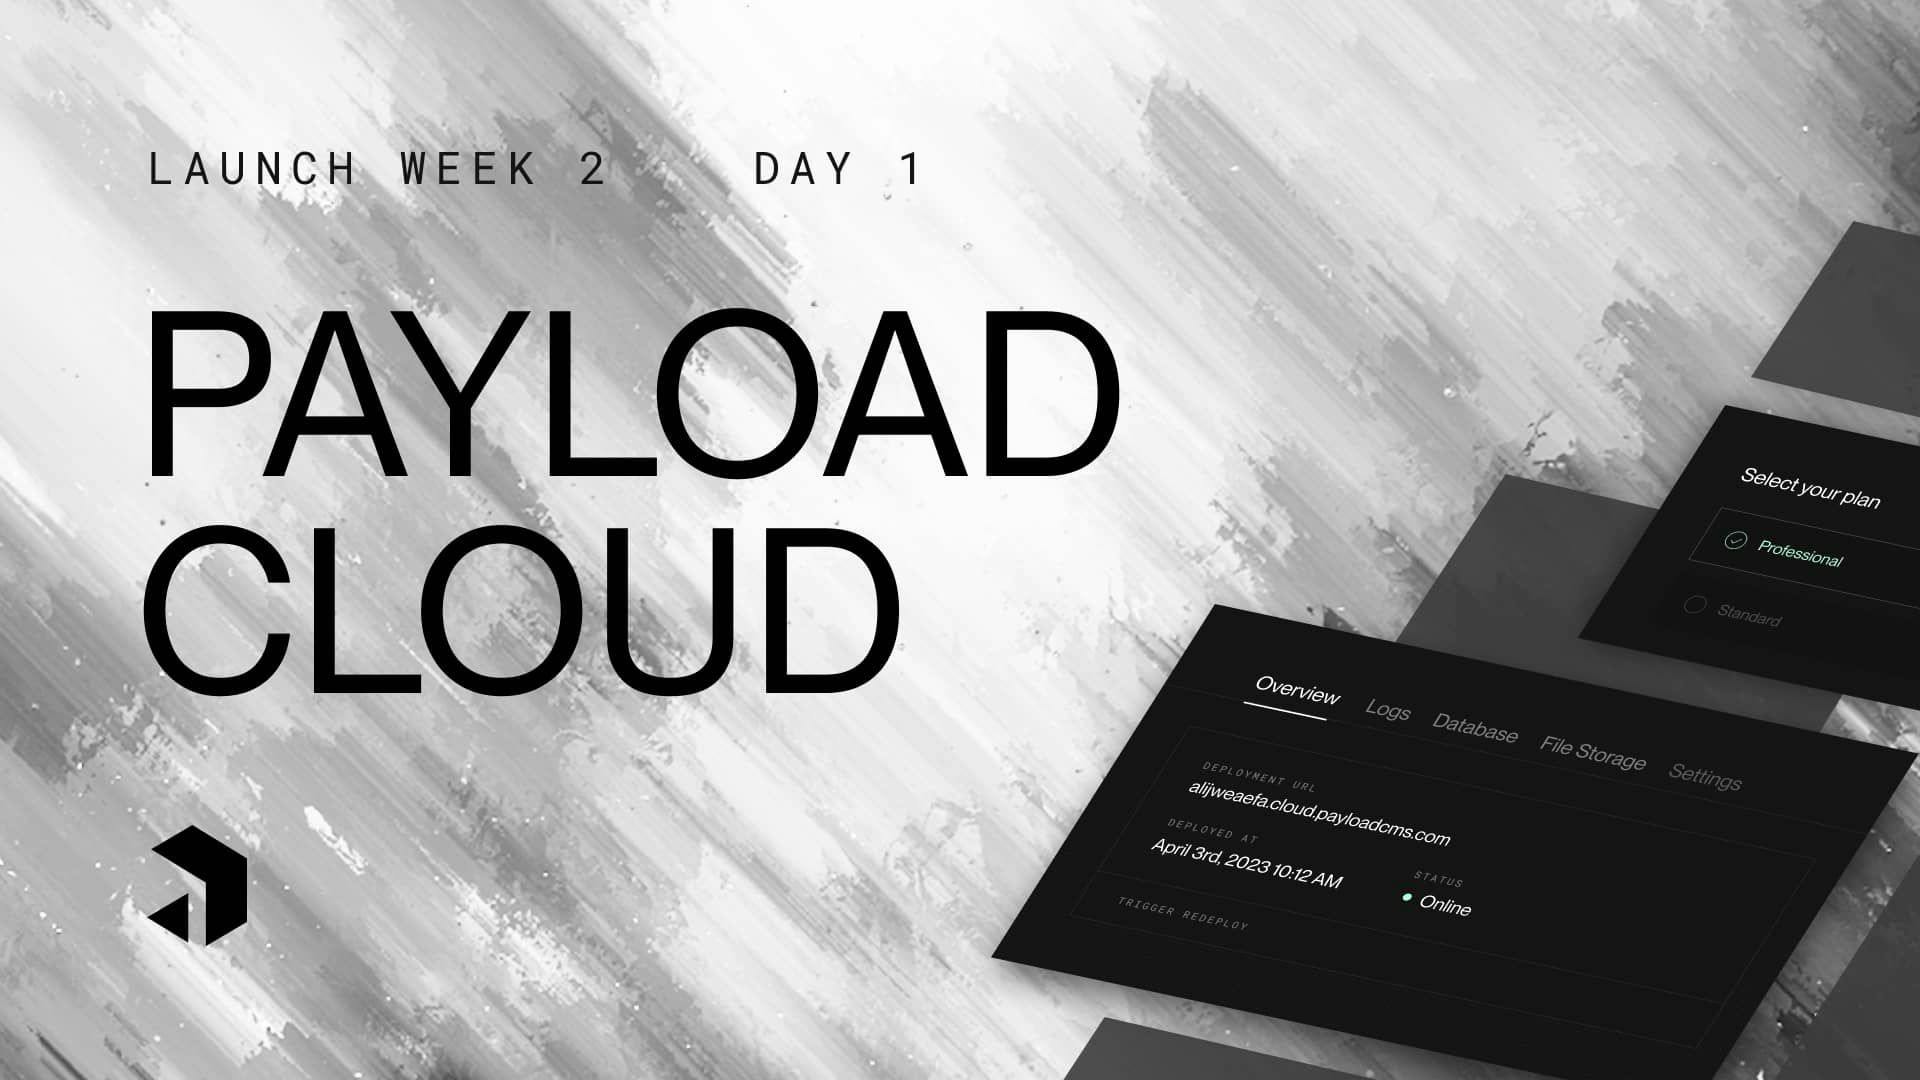 Launch Week Day 1 - Payload Cloud